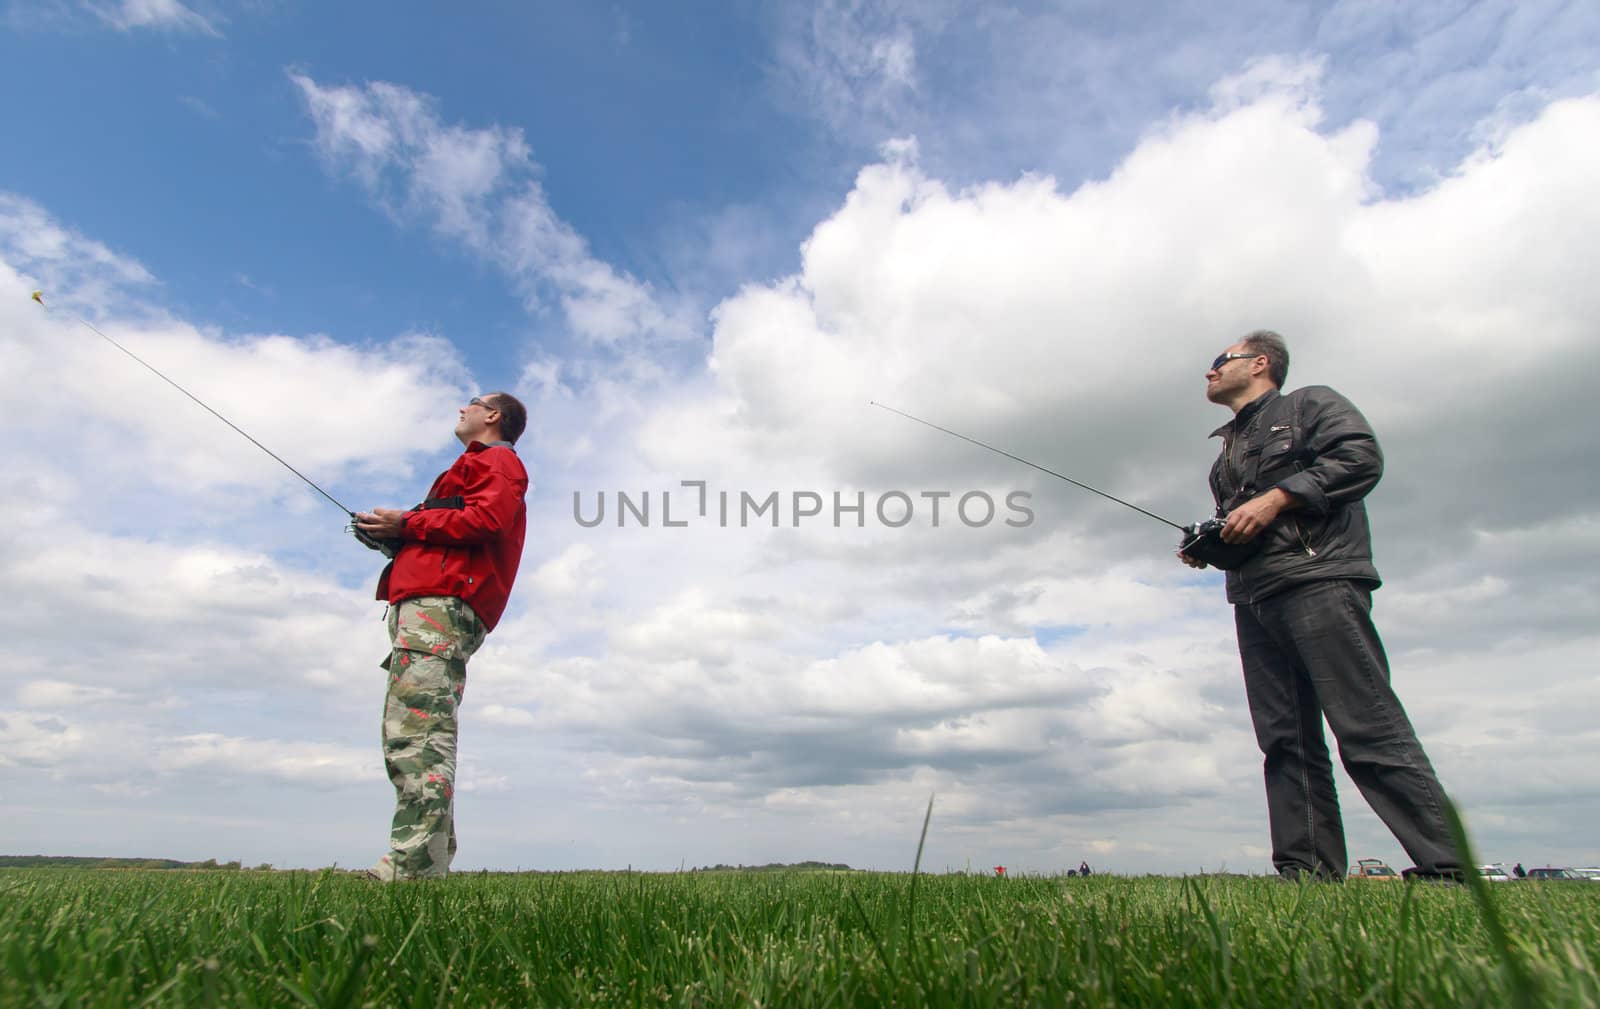 Two Man controls RC gliders in the sky